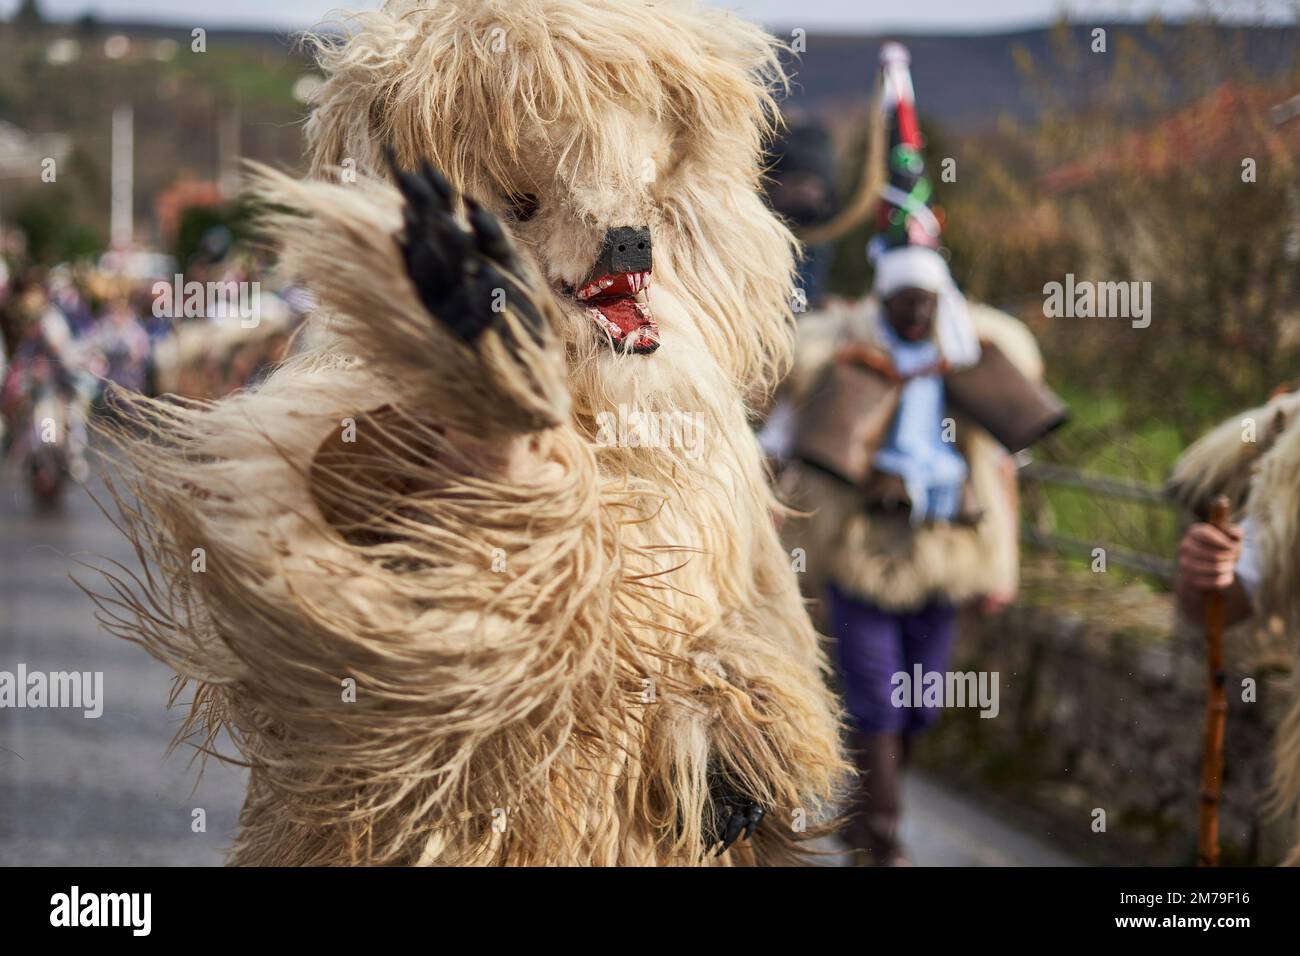 08 January 2023, Spain, Silió: The figure of the bear that roams the streets represents evil and refers to the pastoral world. The Vijanera, a traditional carnival in northern Spain, is an ethnographic celebration that takes place at the winter solstice. Villagers dressed in natural costumes dance loudly to welcome the New Year and drive away evil spirits. Photo: Felipe Passolas/dpa Stock Photo